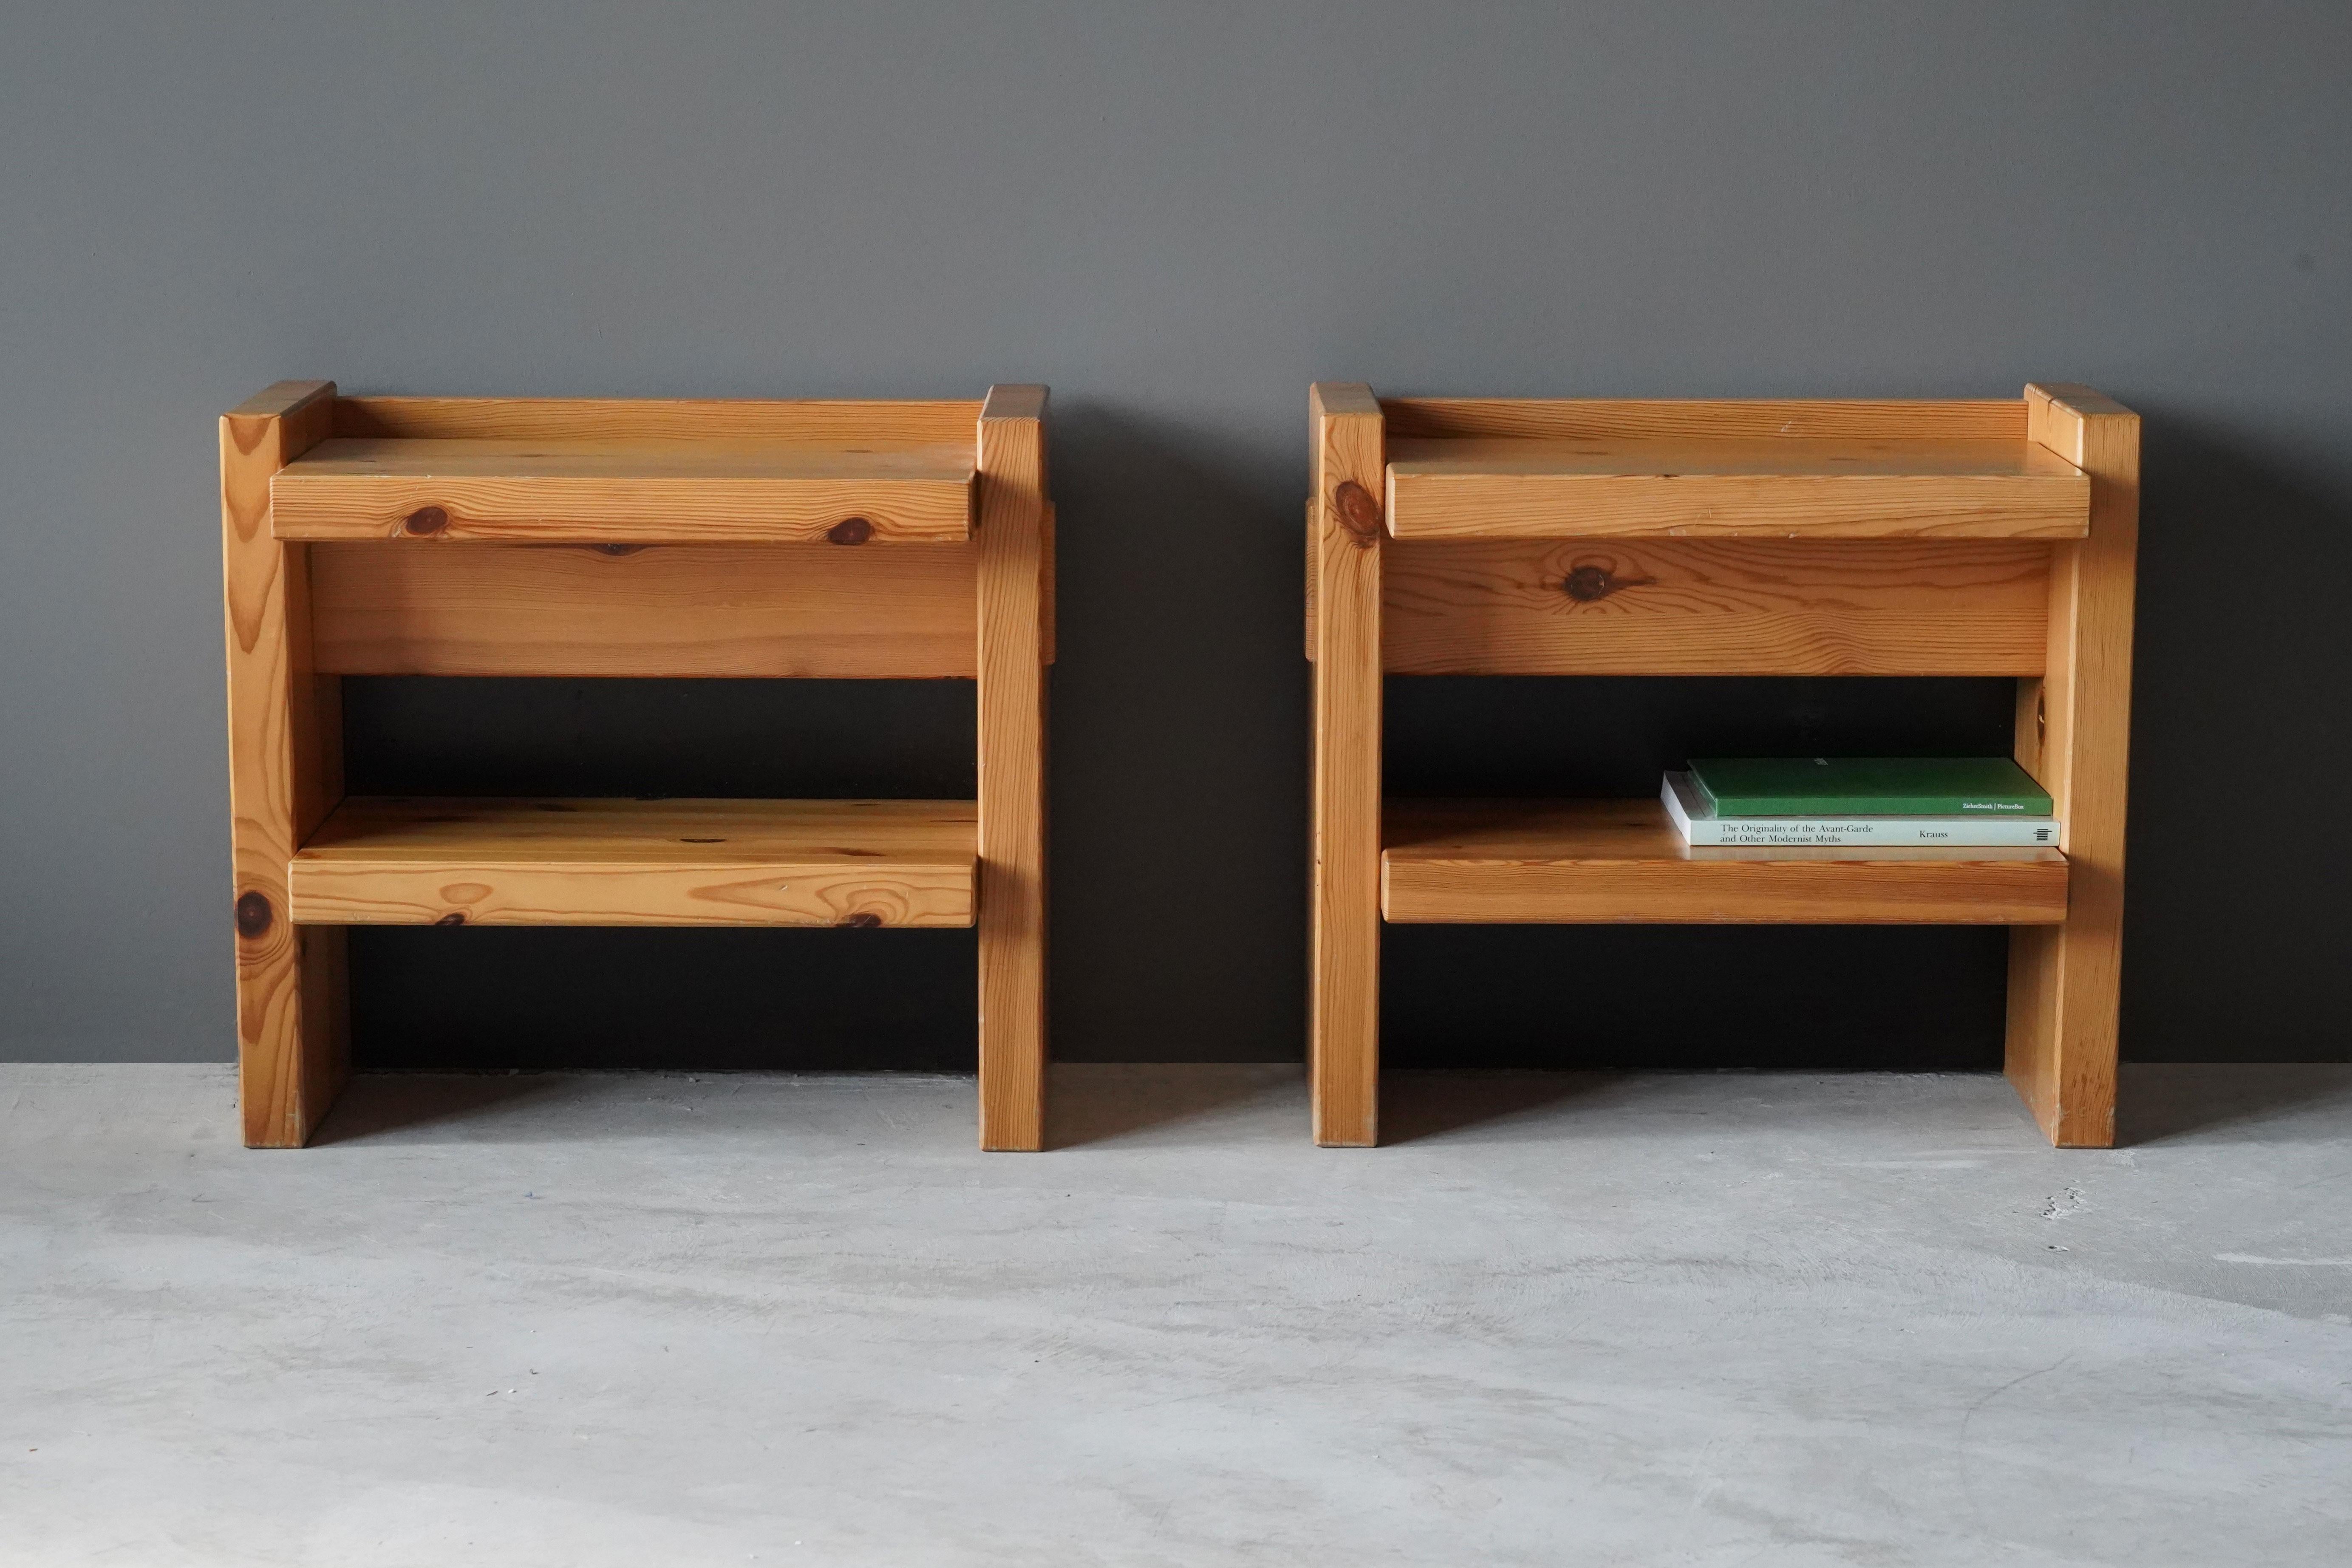 A pair of modern Minimalist nightstands / bedside tables / bedside cabinets. Design and production attributed to Roland Wilhelmsson, Studio. 

Other designers working in similar Minimalist style include Charlotte Perriand, Axel Einar Hjorth, and